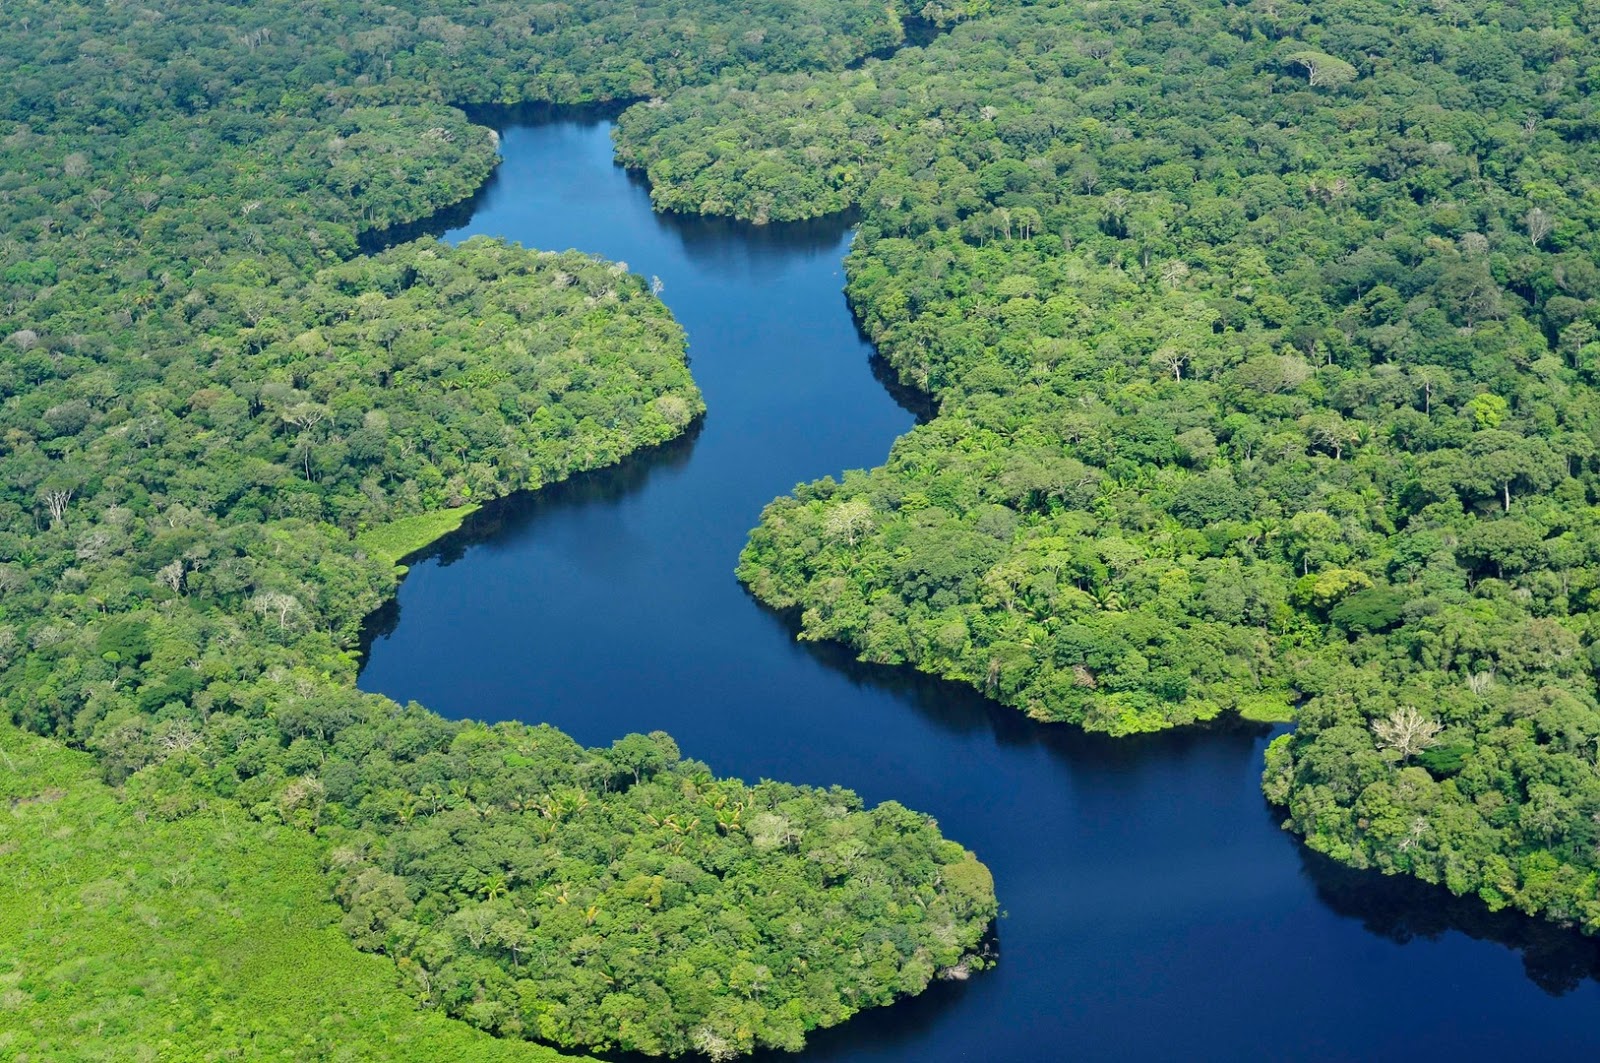 The Amazon rainforest | Where is Brazil - All about Brazil